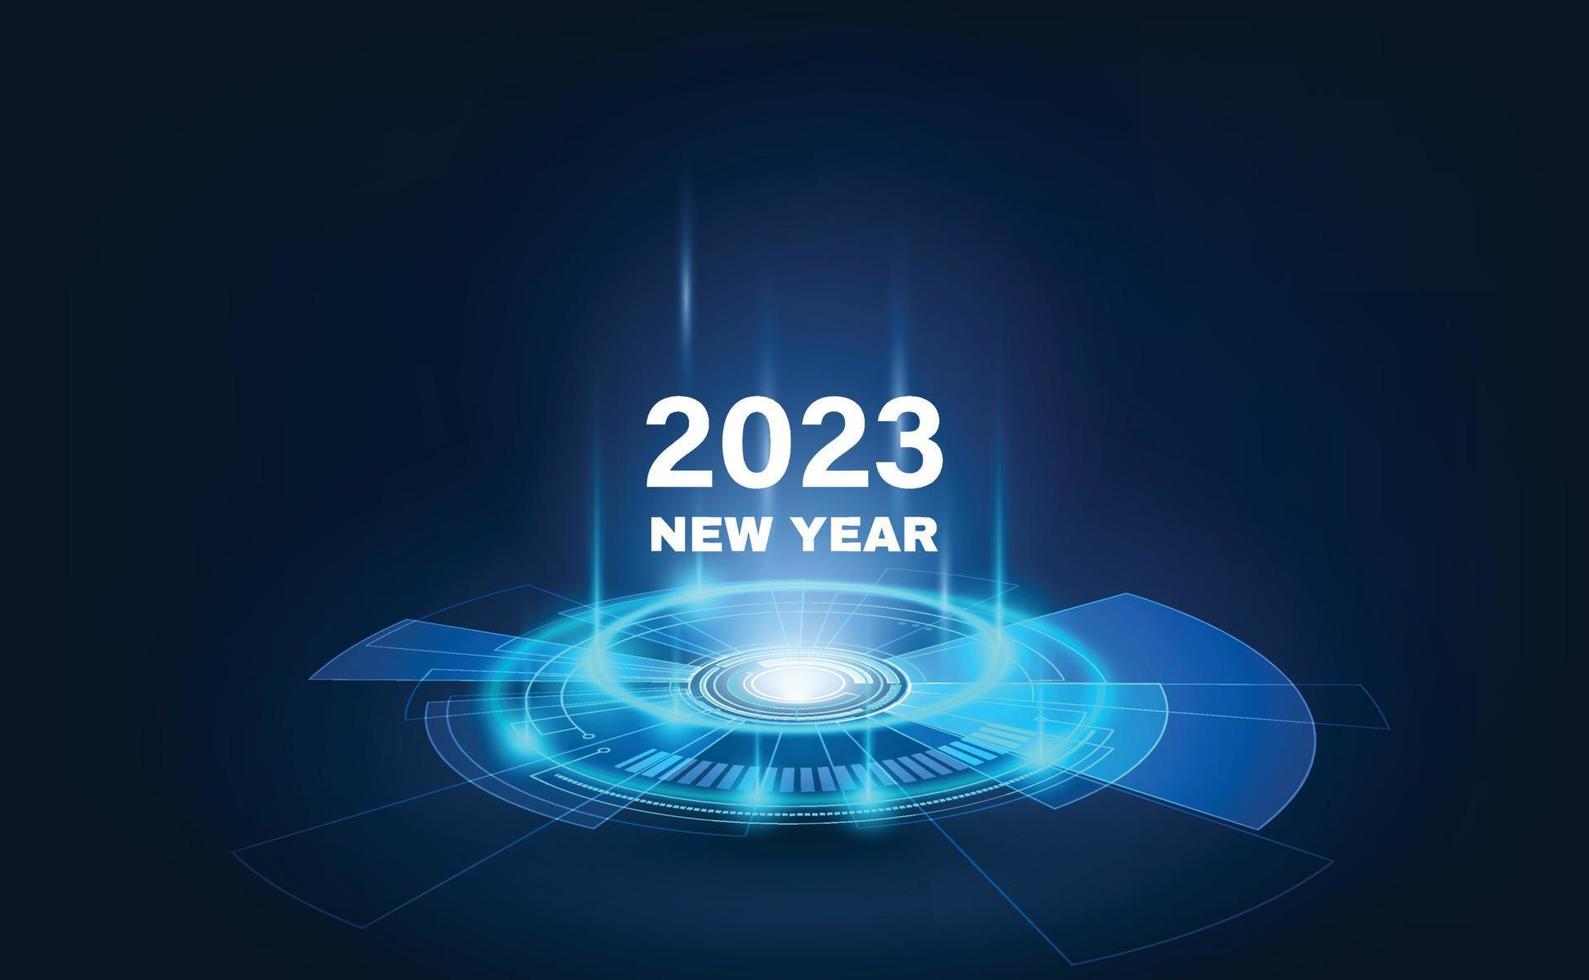 Happy New Year 2023 celebration with bule light abstract clock on futuristic technology background, countdown concept. vector